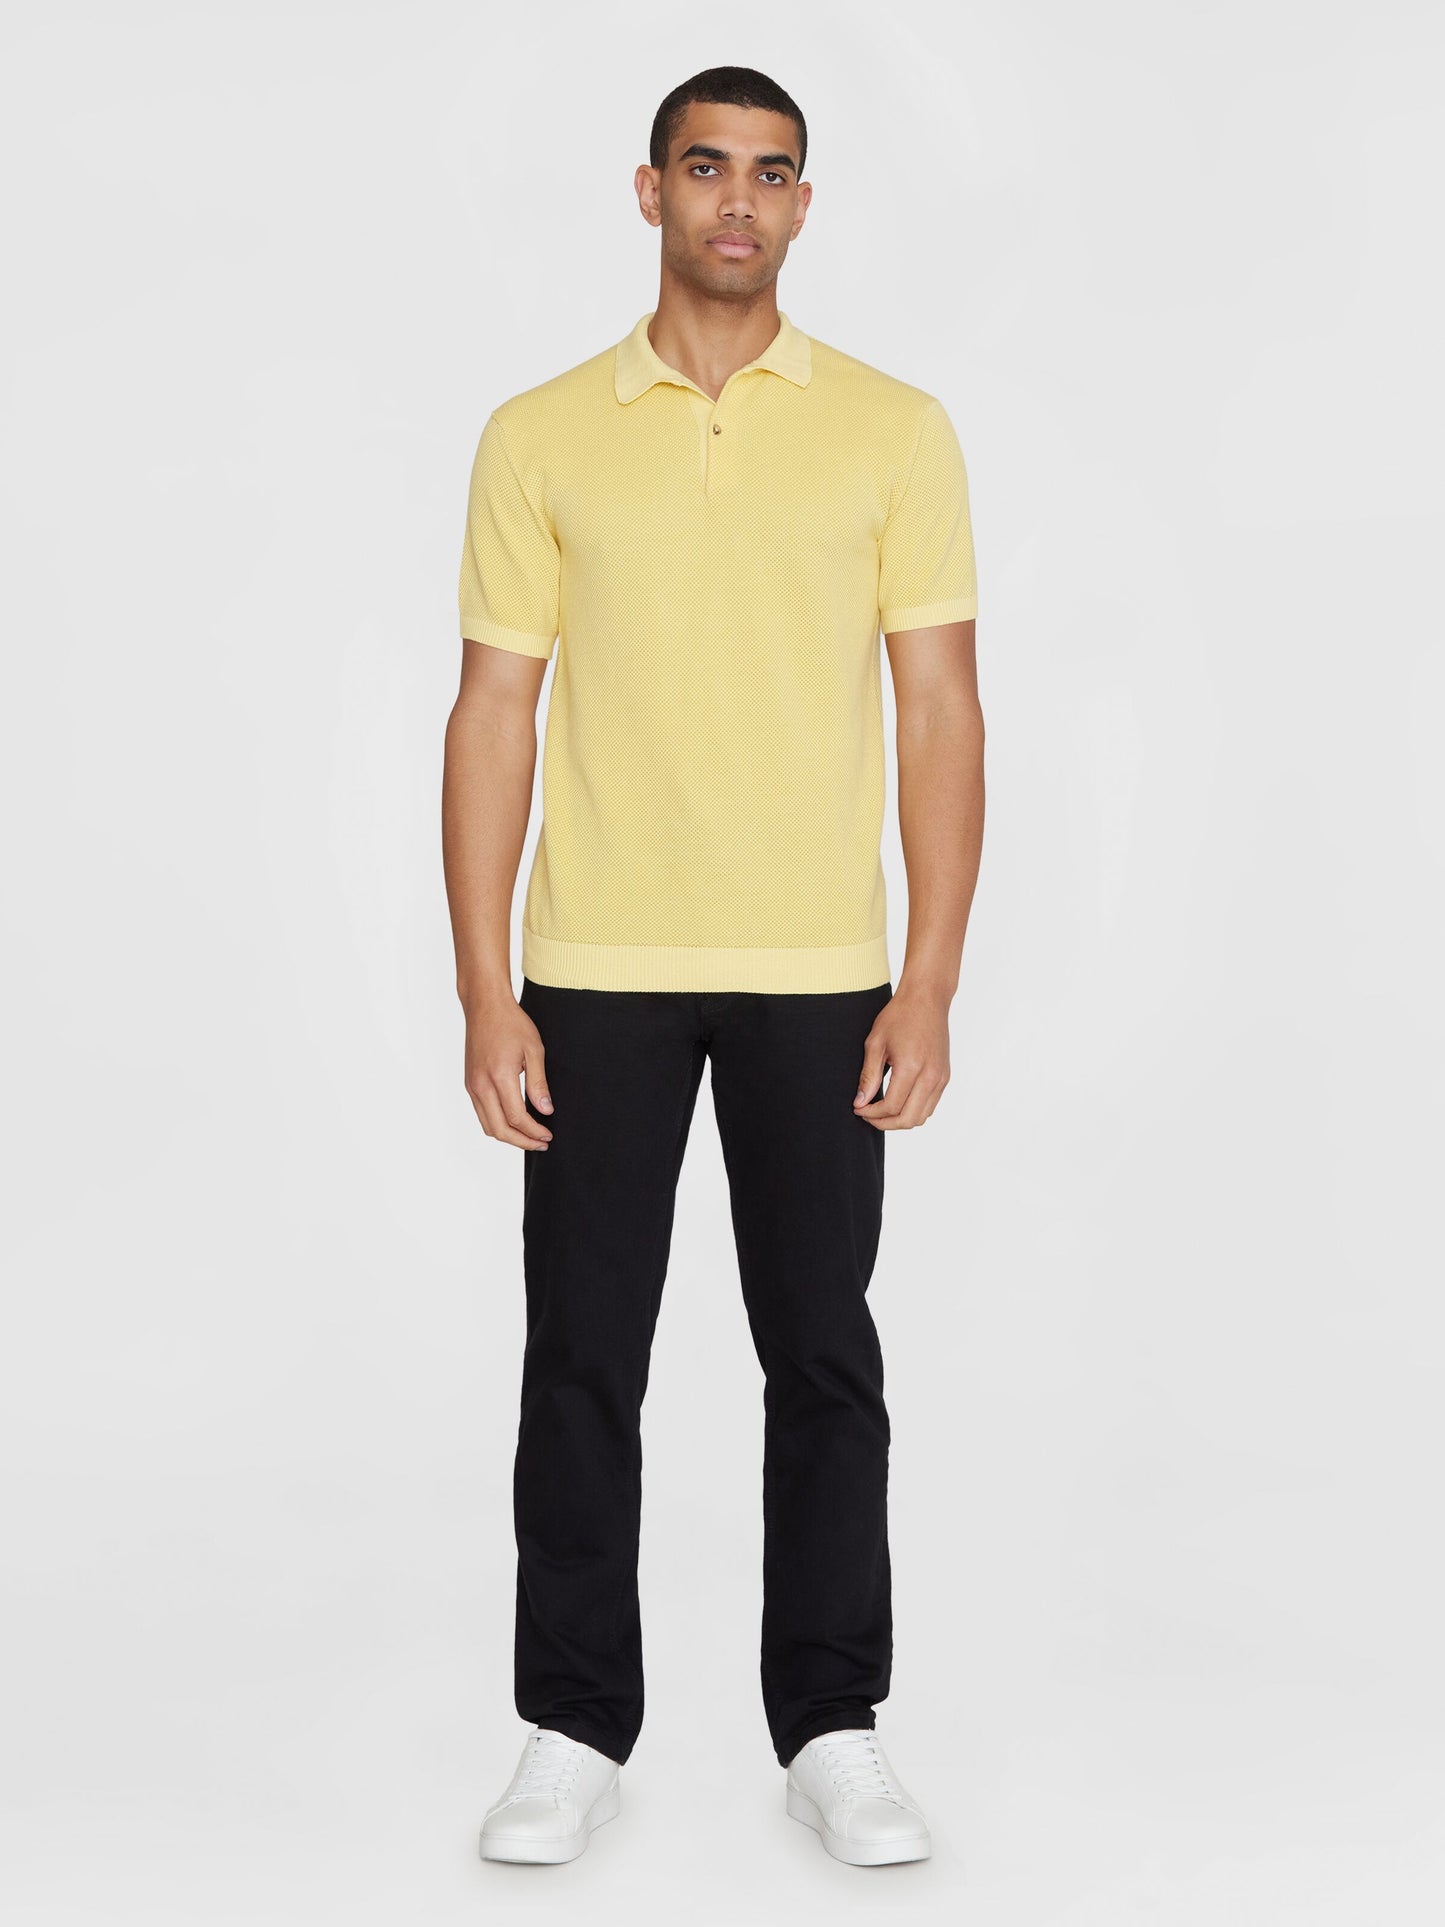 KCA - Regular two toned knitted short sleeved polo Misted Yellow